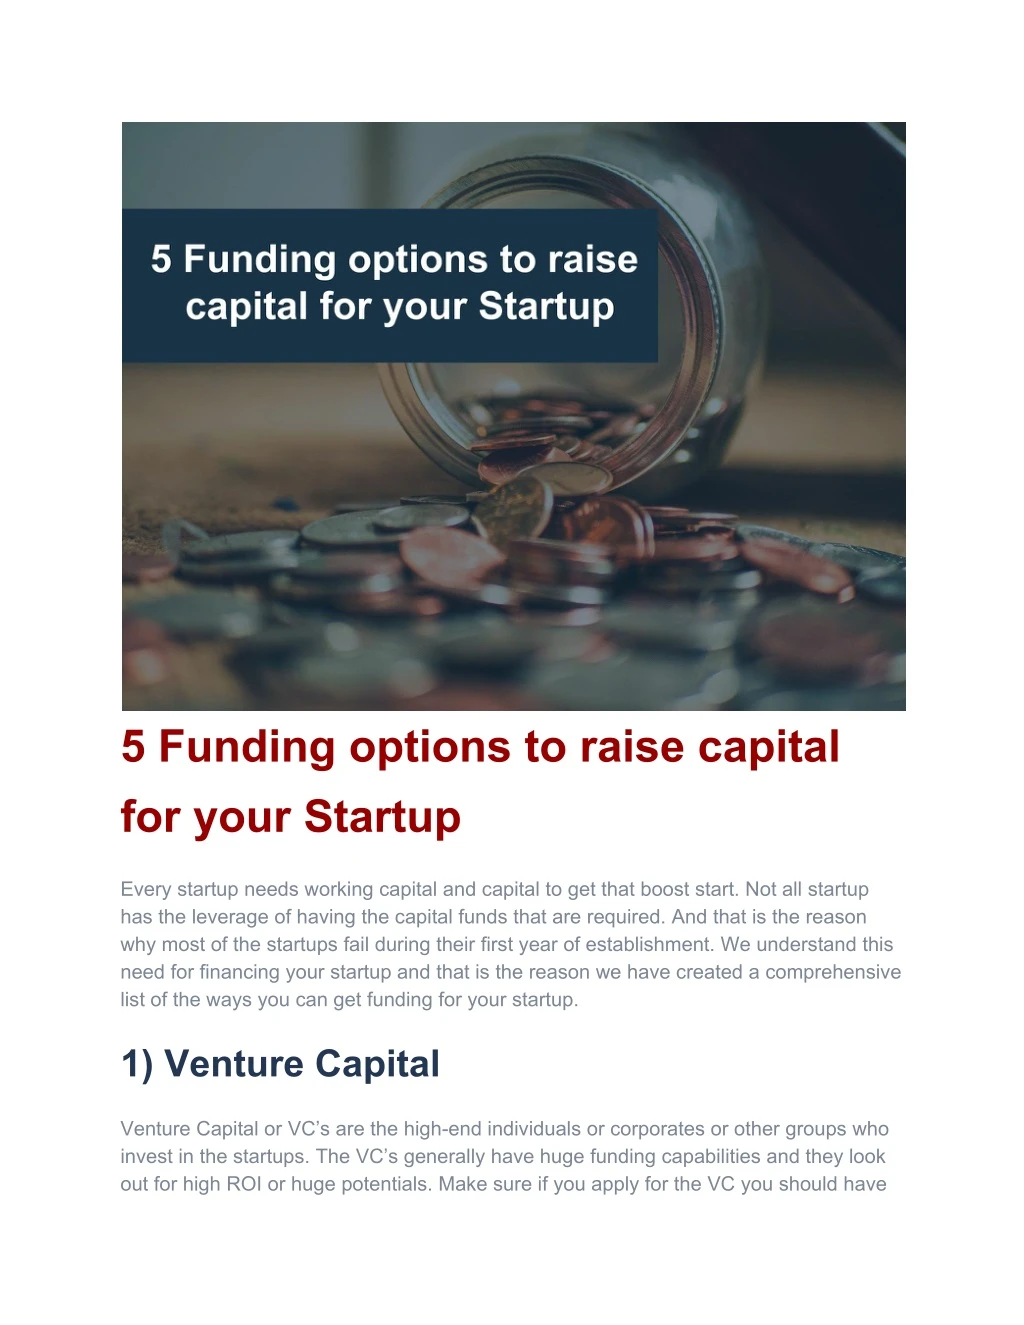 5 funding options to raise capital for your